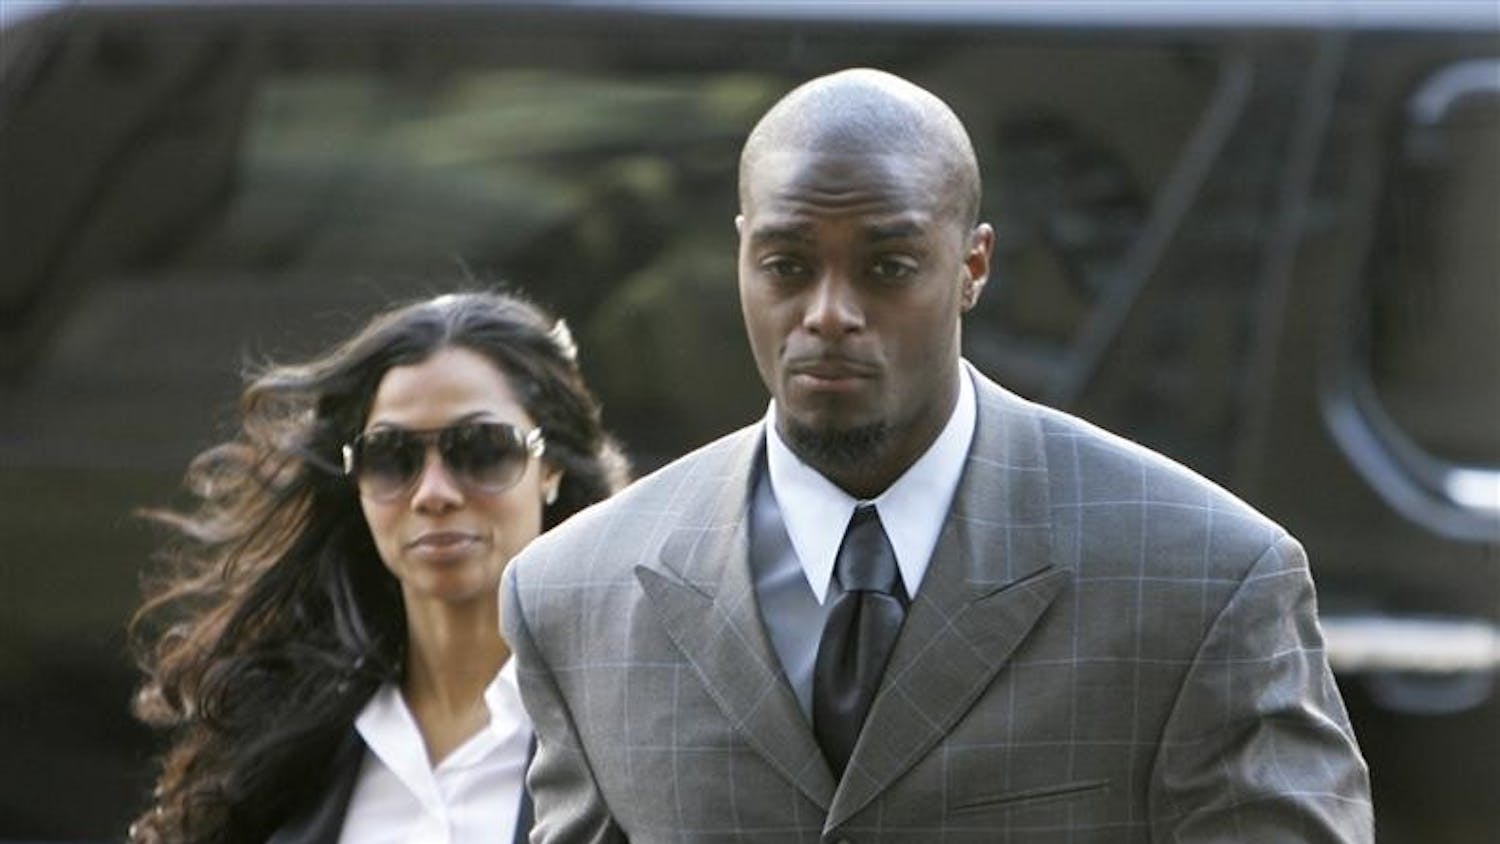 New York Giants football player Plaxico Burress enters the criminal courts building wife his wife, Tiffany, Tuesday in New York. A gun possession case against Burress has been adjourned until June 15. Burress accidentally shot himself in the leg with an unlicensed gun at a nightclub last year.